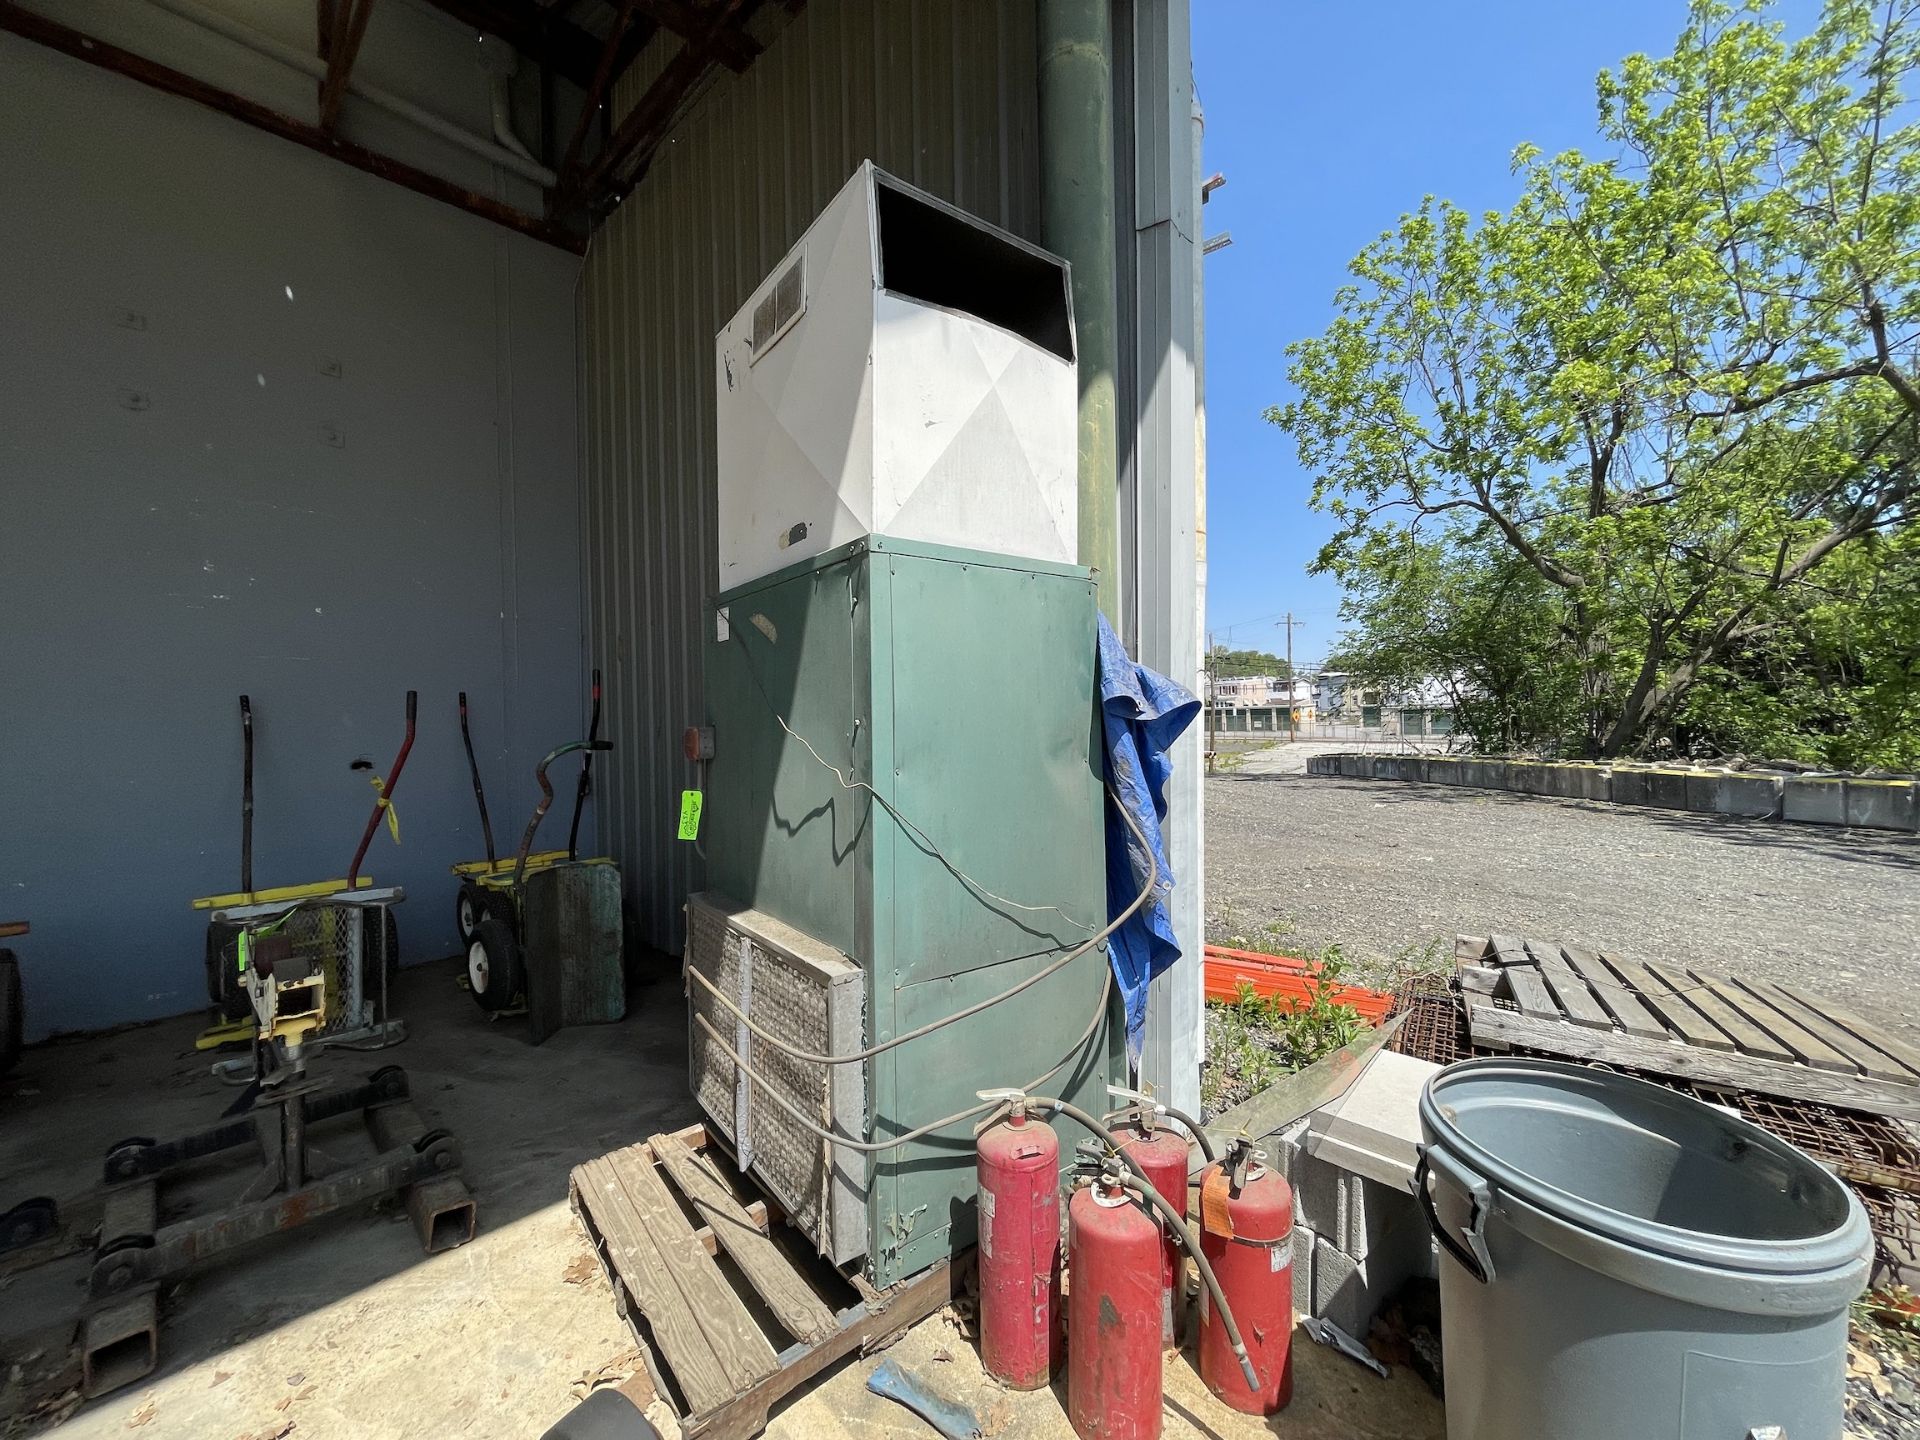 Oil-Fired Furnace - Upland - Image 2 of 4